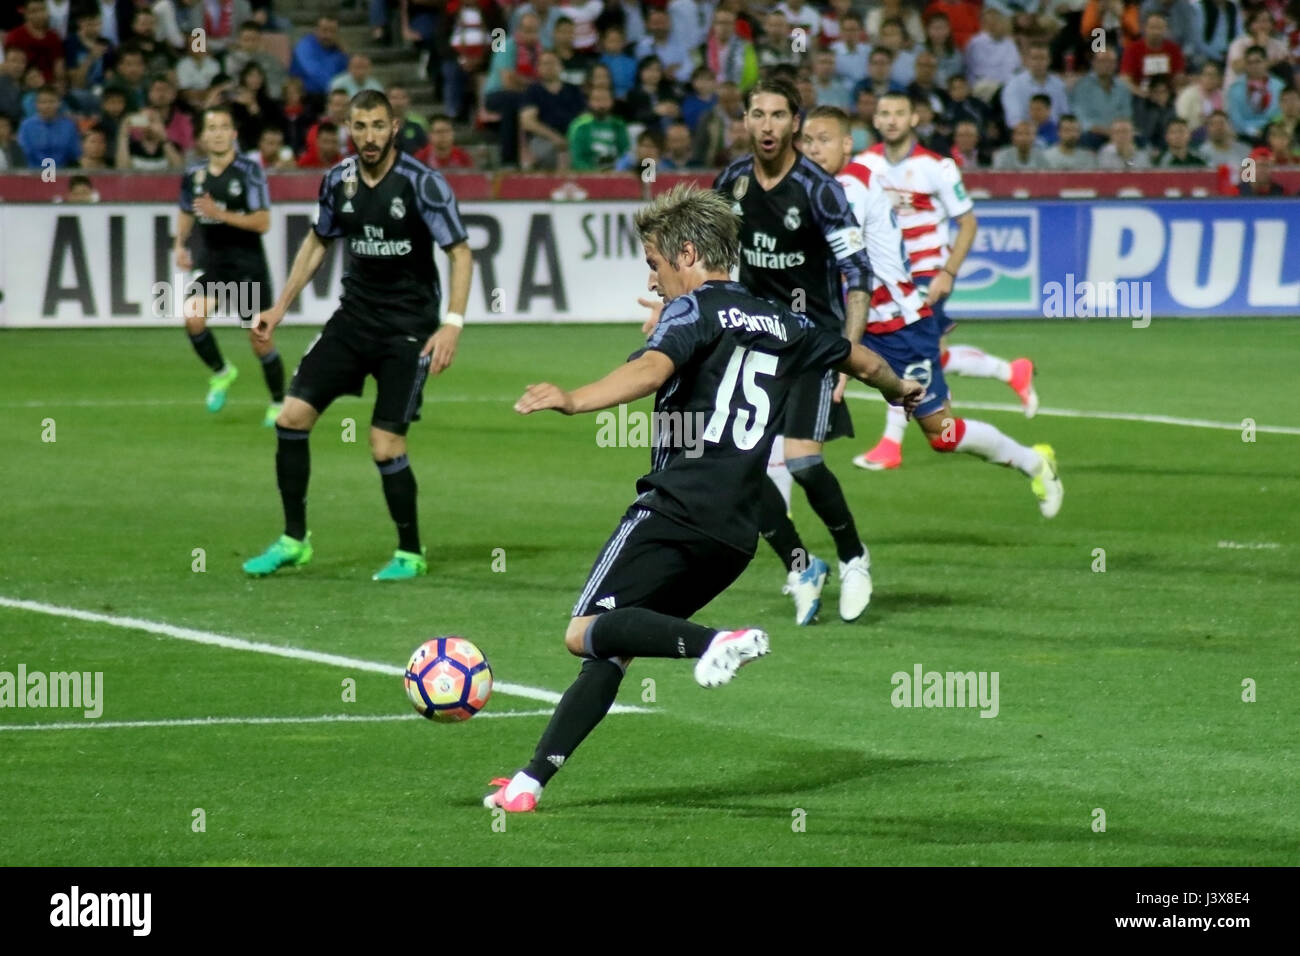 Granada, Spain. May 6, 2017 - Fabio Coentrao with the ball. Real Madrid defeated Granada 0-4 with goals scored by James Rodriguez (3 and 10 minute) and Alvaro Morata (30 and 35 minute). Matchday 36 game played in Los Nuevos Carmenes Stadium. Photo by Jose Velasco | PHOTO MEDIA EXPRESS Stock Photo